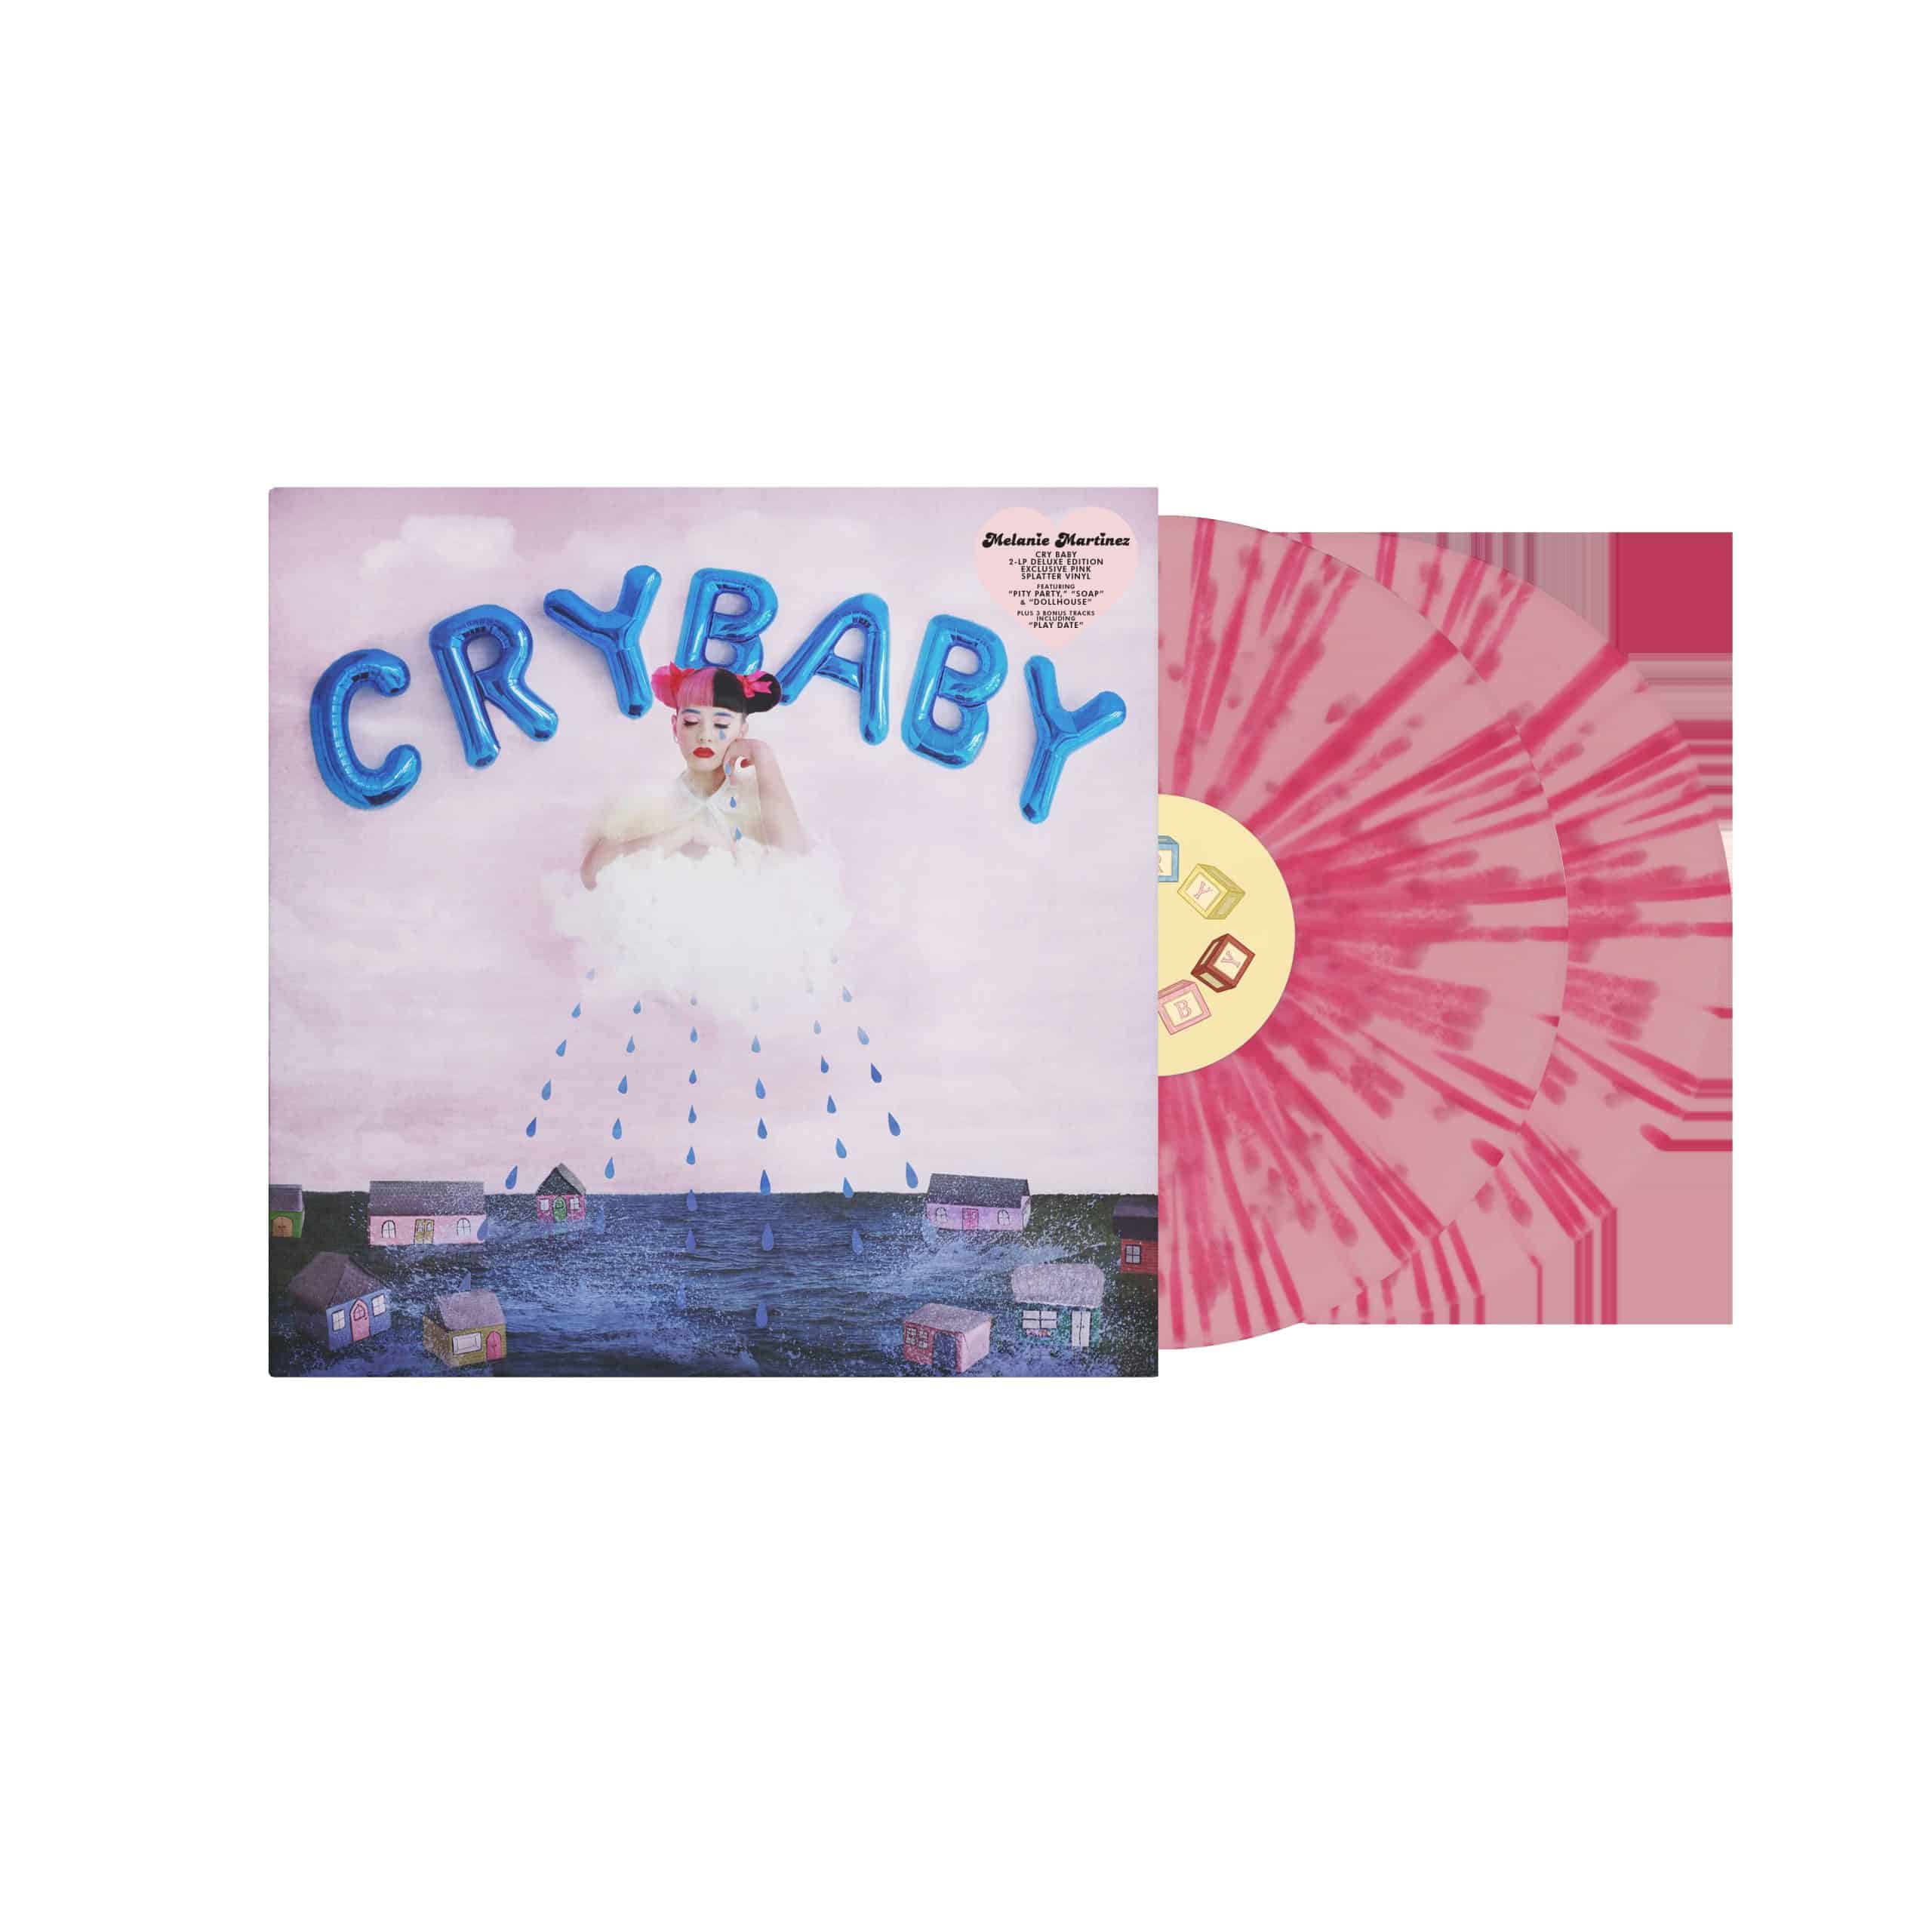 Cry-Baby-Deluxe-Edition-Pink-Splatter-.jpg